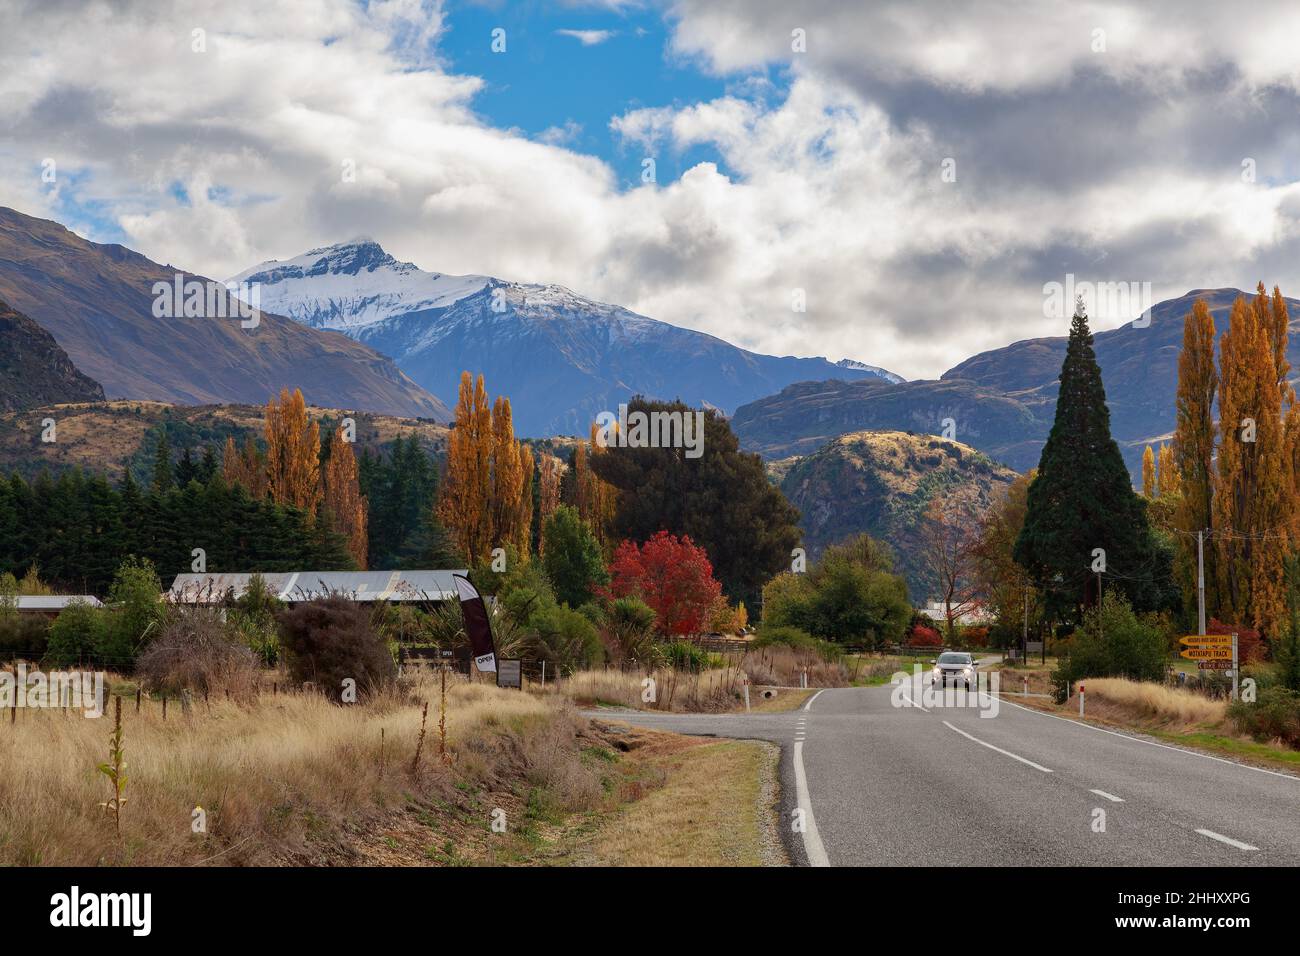 A rural road leads to the mountains in the Otago region, New Zealand. Photographed in autumn Stock Photo